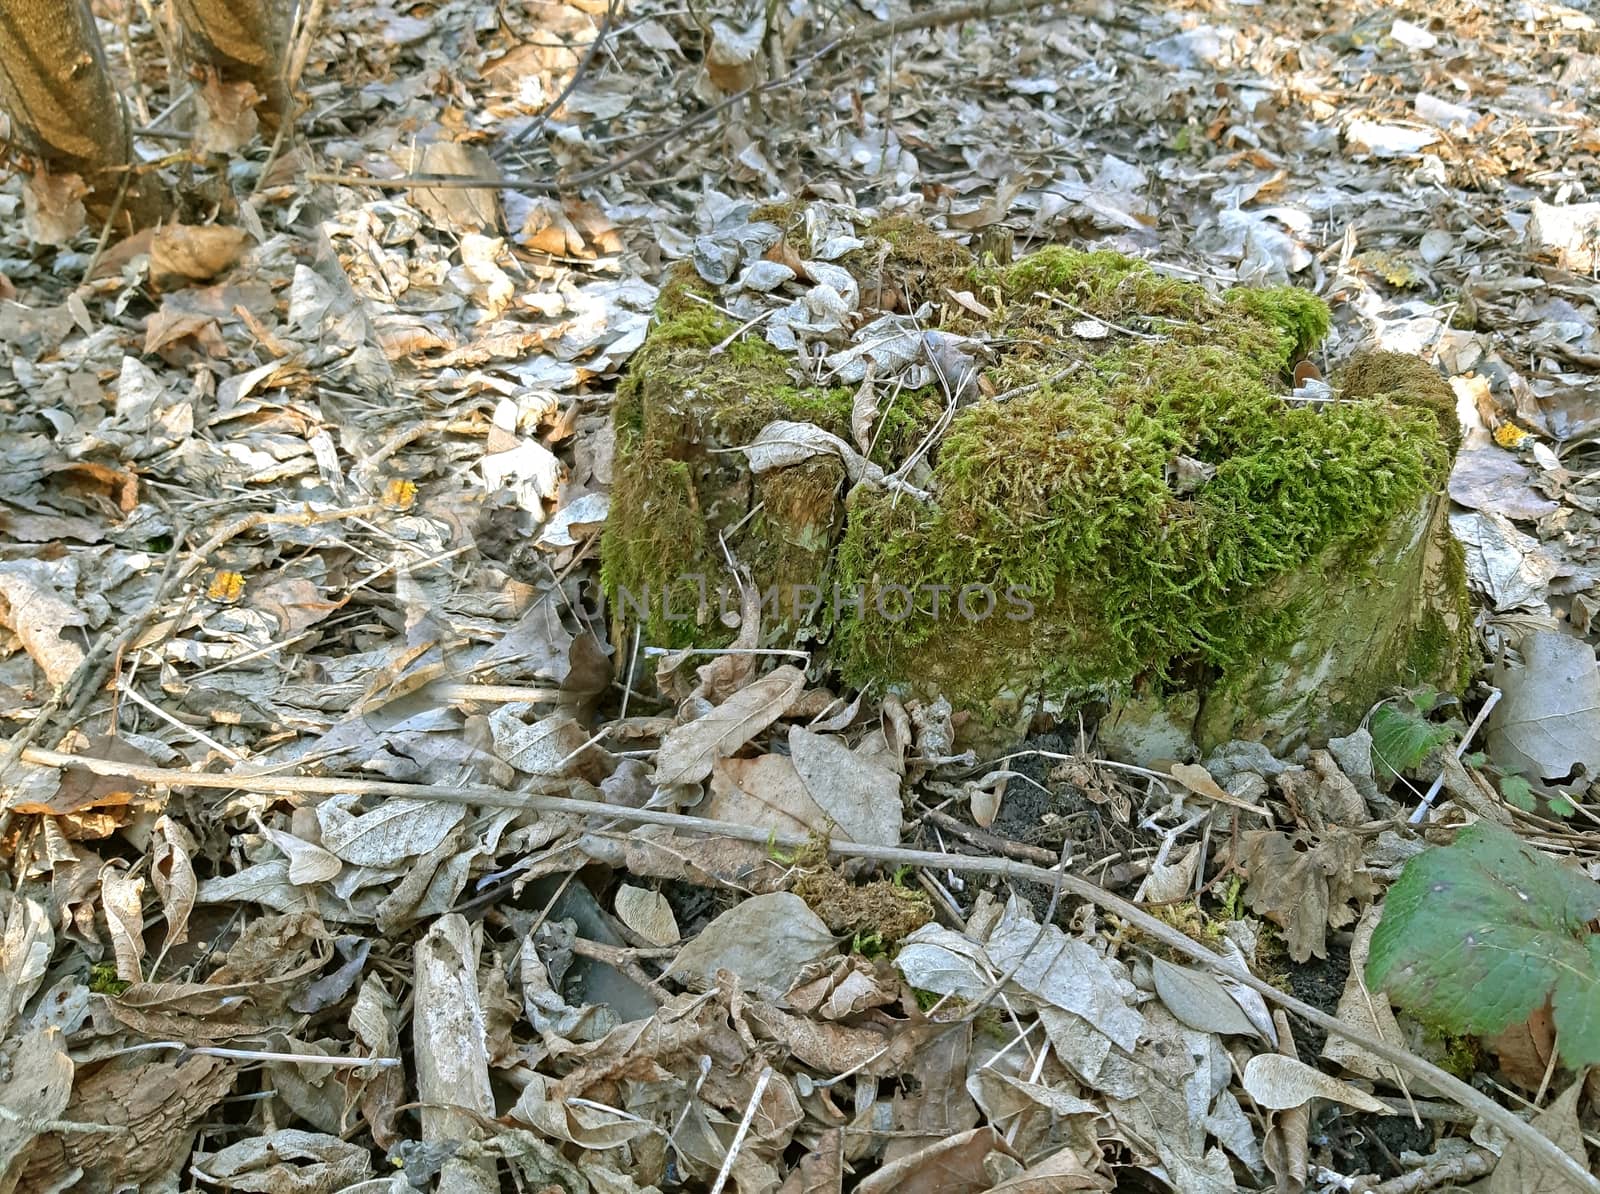 Moss growing on a stump in the forest.